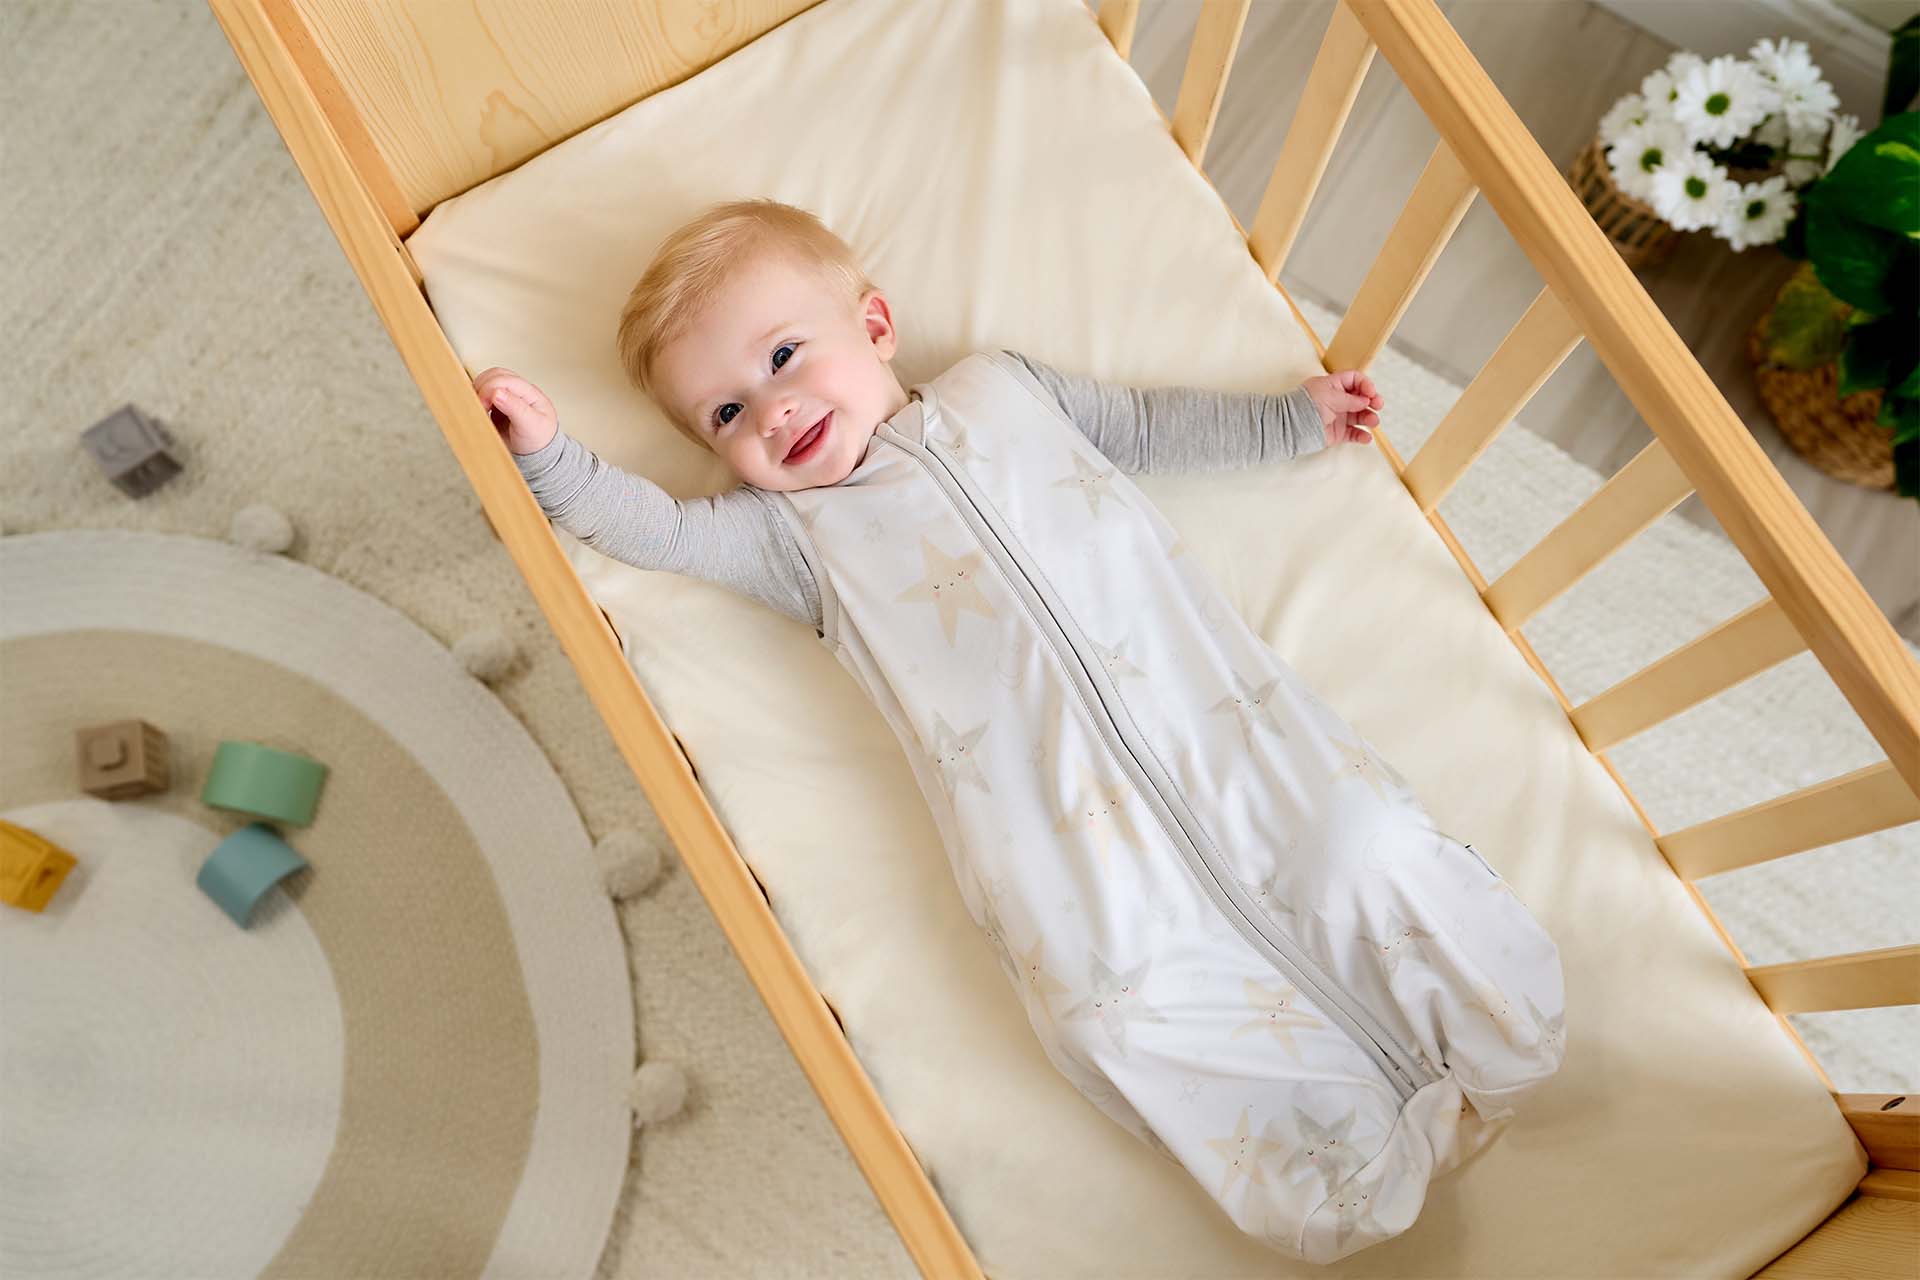 A baby in a Gerber Childrenswear sleep sack lying in a crib and smiling up at the camera.